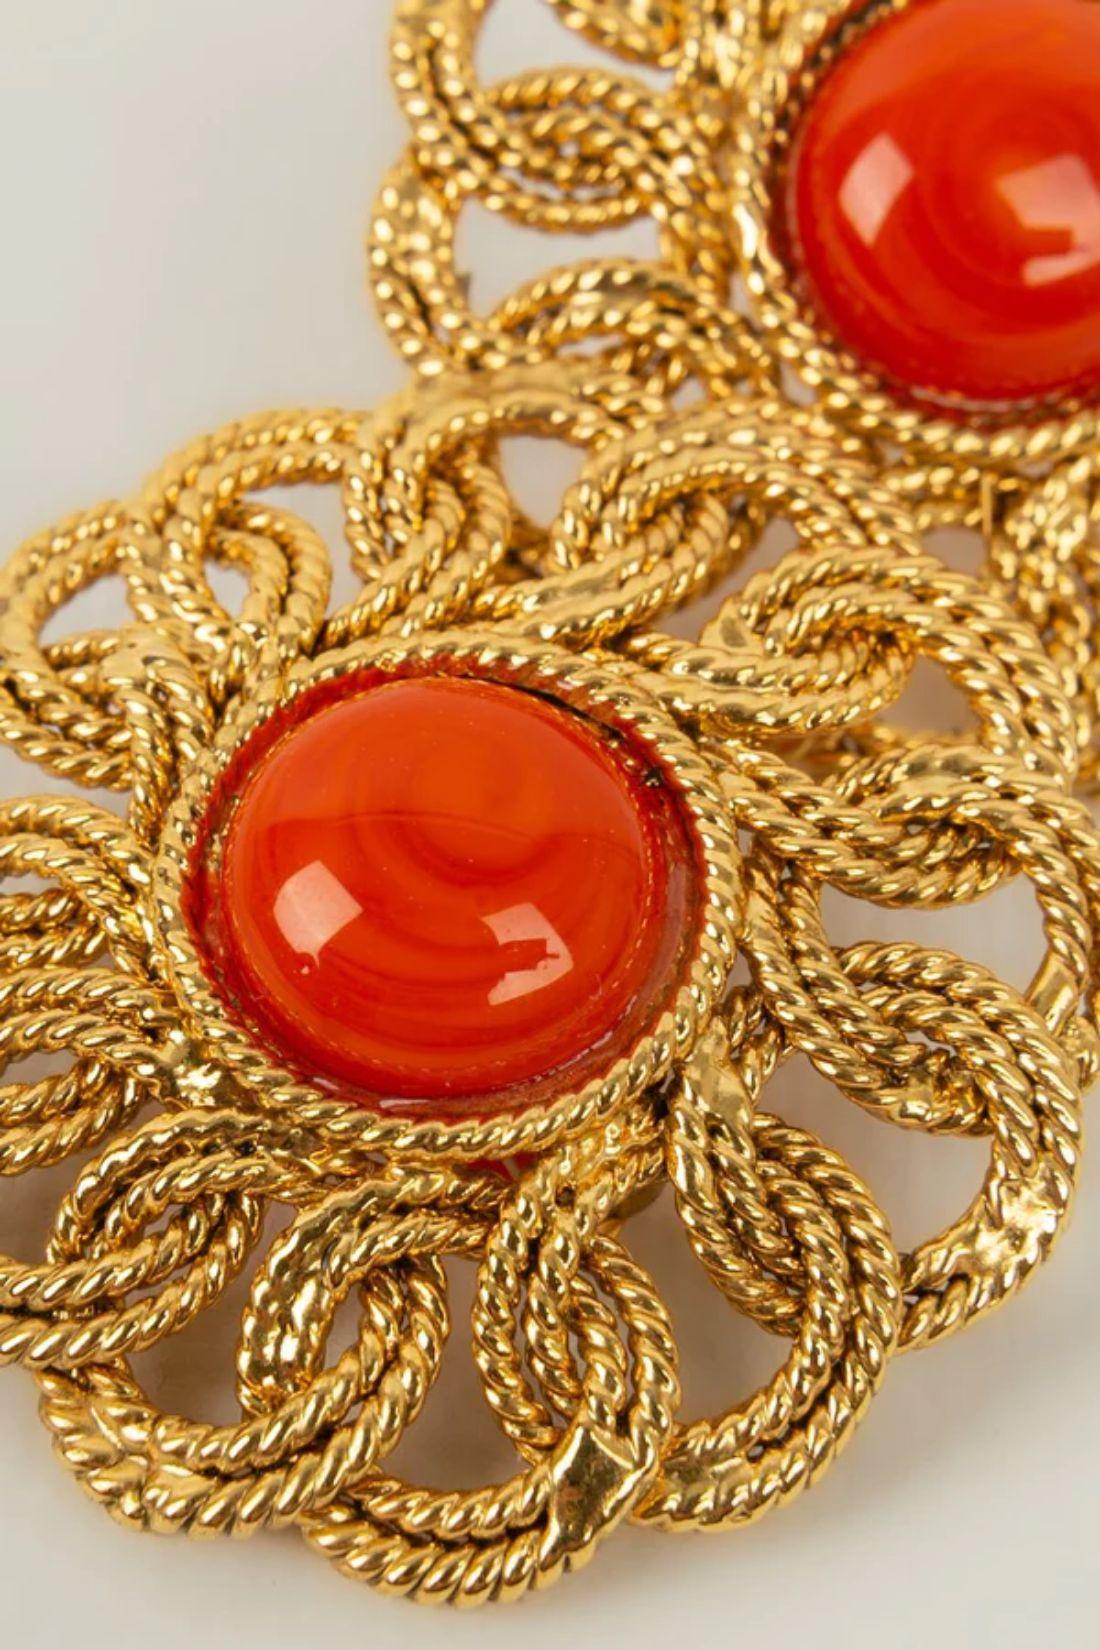 Chanel - (Made in France) Clips earrings in gold metal and orange glass paste. Collection 2cc8.


Additional information:
Dimensions: Ø 5 cm

Condition: 
Very good condition

Seller Ref number: BOB88

With her expertise in vintage fashion, Isabelle